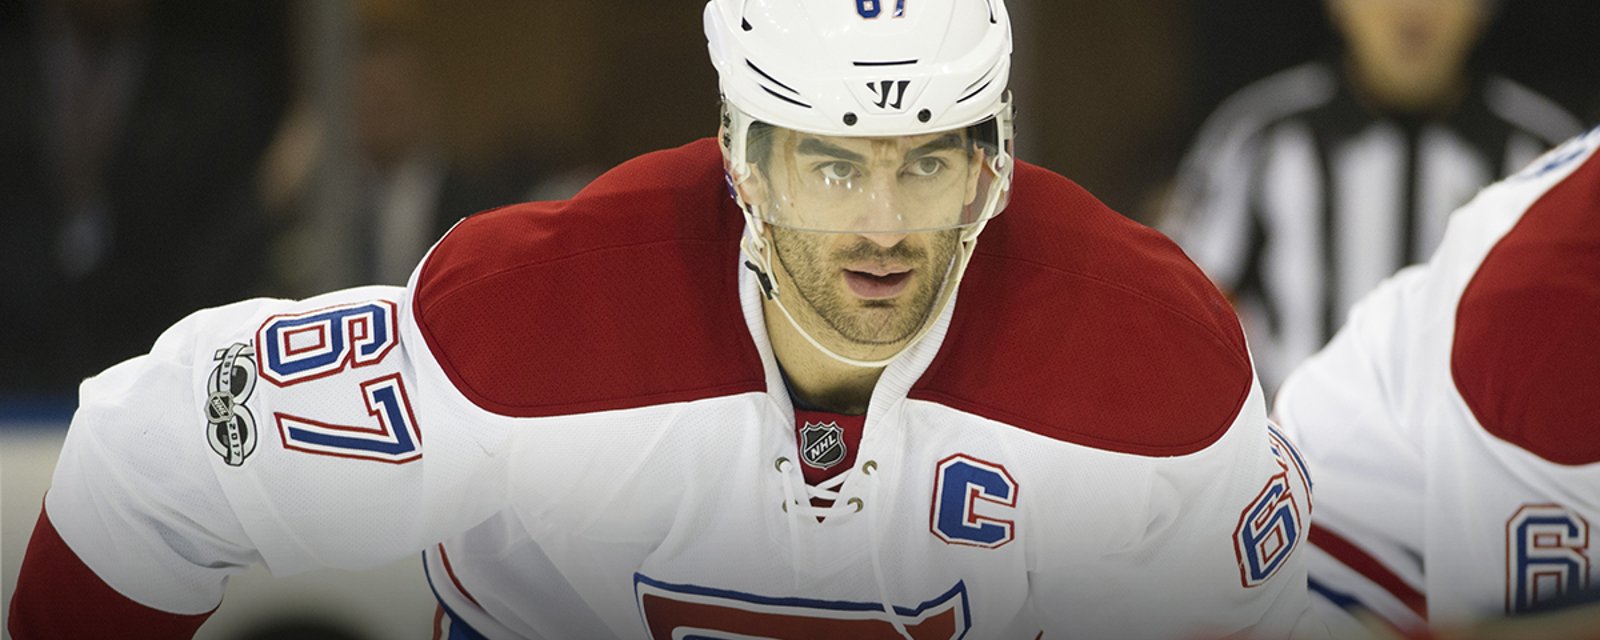 Breaking: NHL legend says Pacioretty should give up his “C”